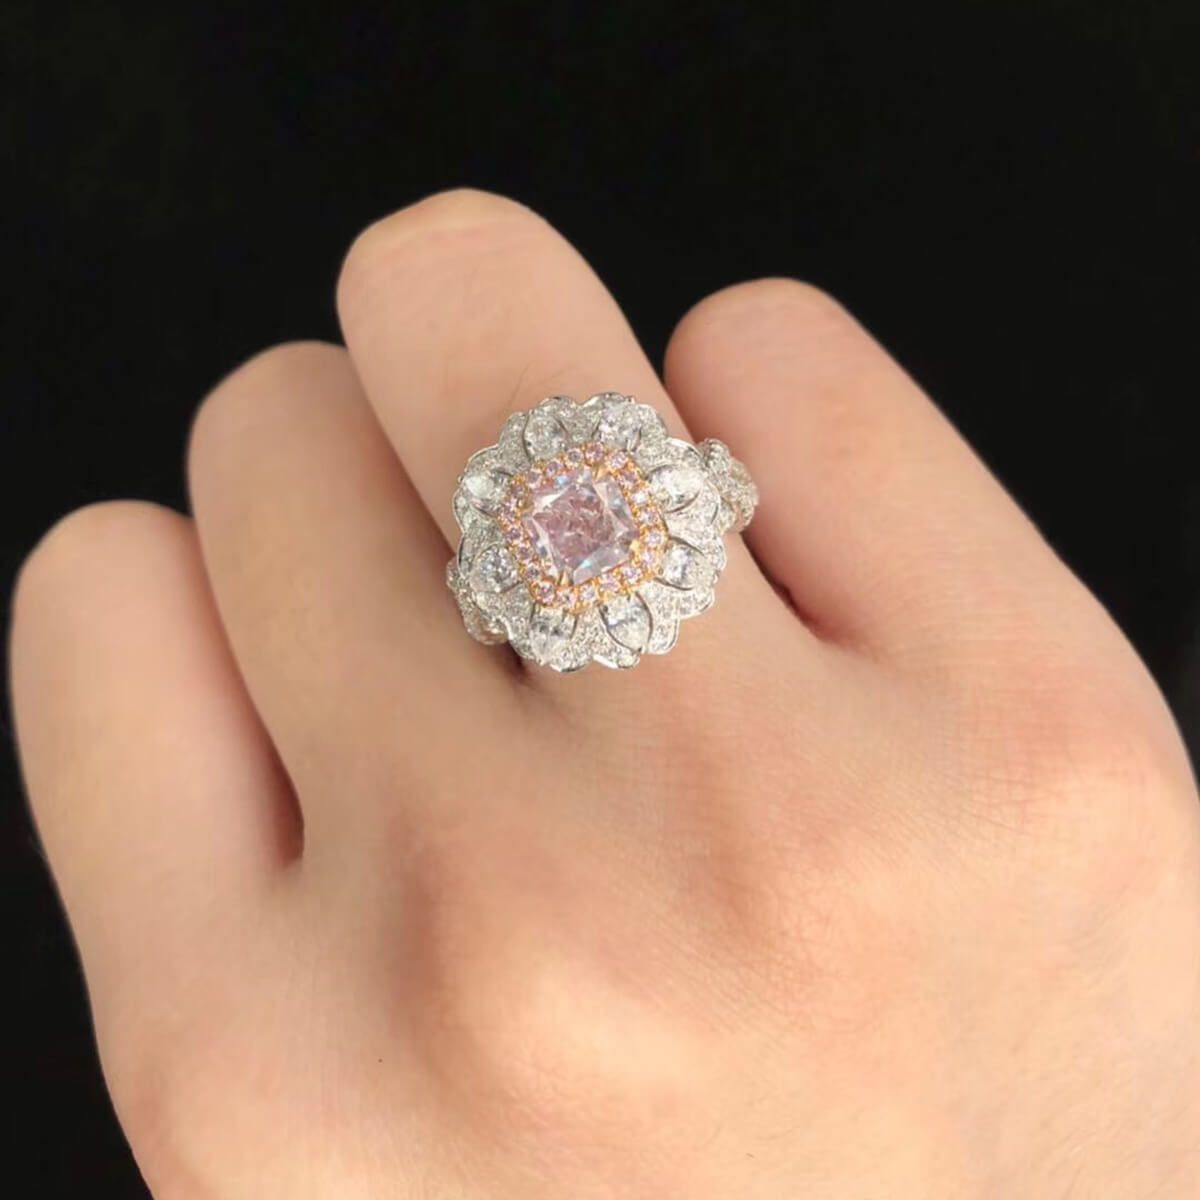 Very Light Pink Diamond Ring, 1.17 Ct. (2.37 Ct. TW), Radiant shape, GIA Certified, 2136728480